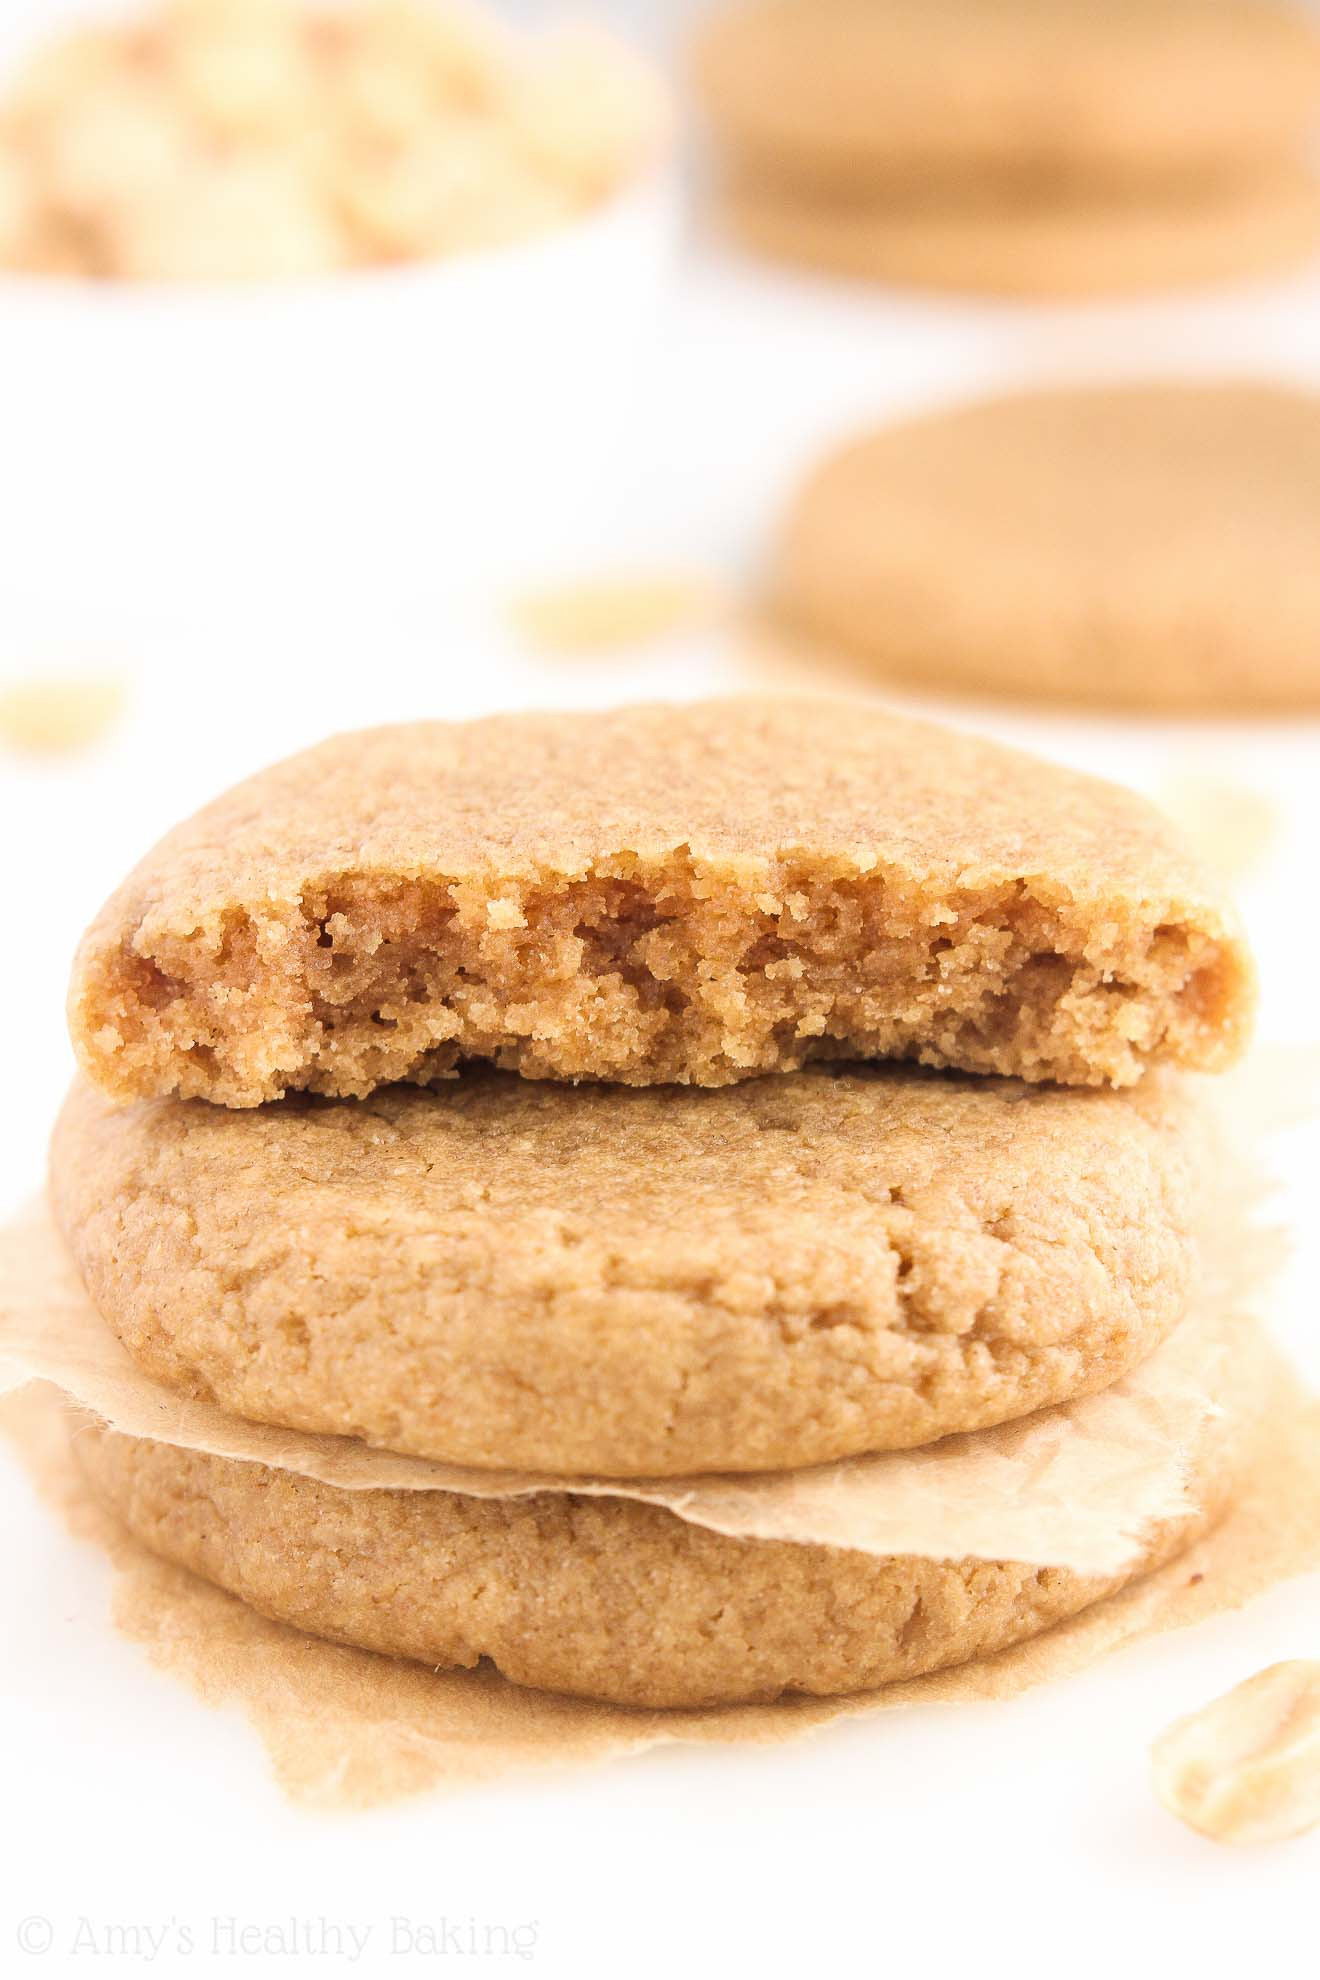 Easy Healthy Peanut Butter Cookies
 VIDEO The Ultimate Healthy Soft & Chewy Peanut Butter